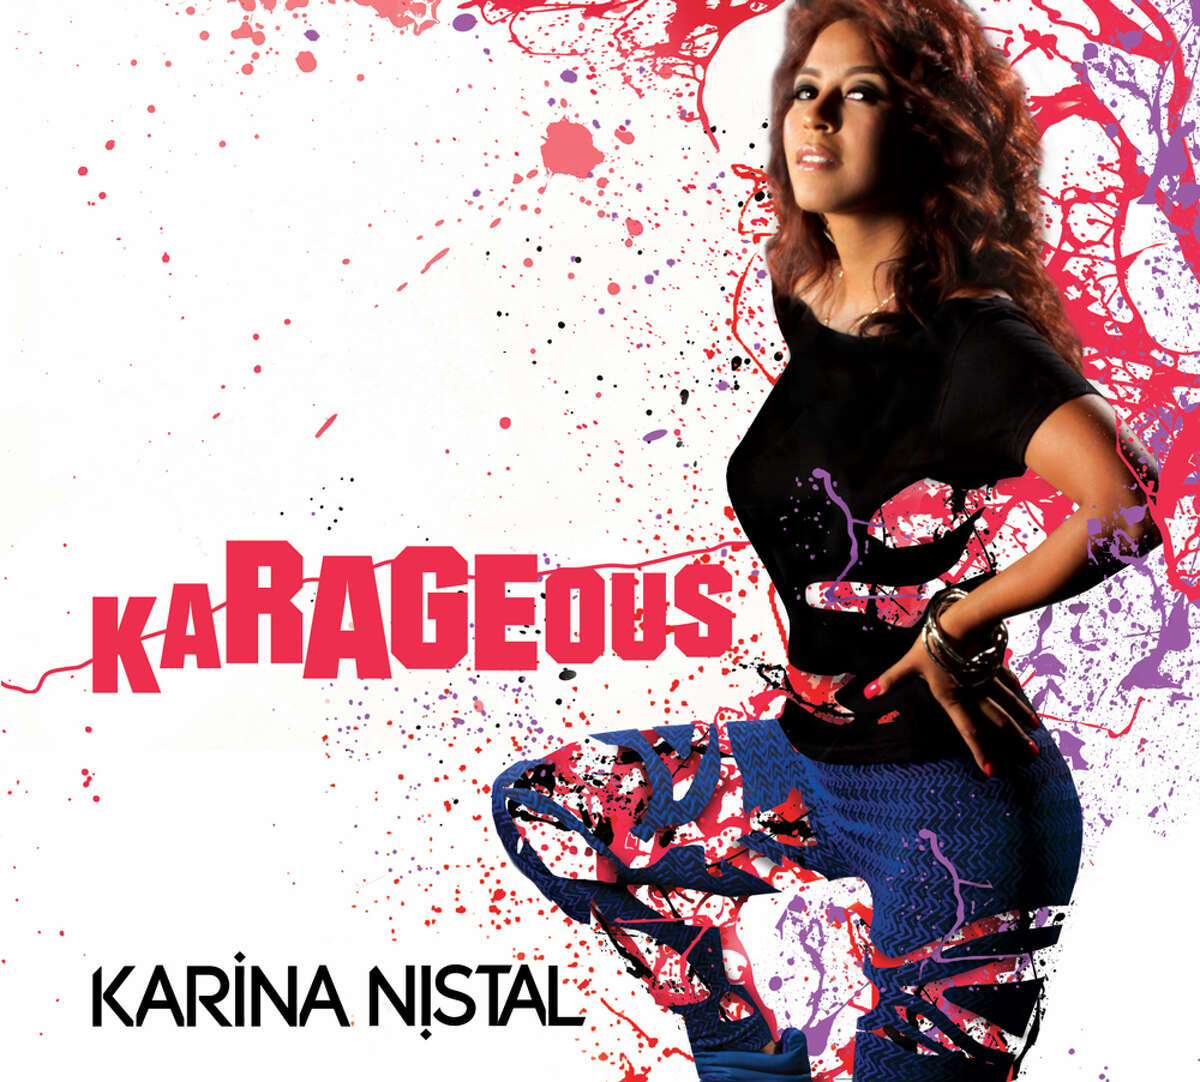 Cover art for "#KaRAGEous" by Karina Nistal.